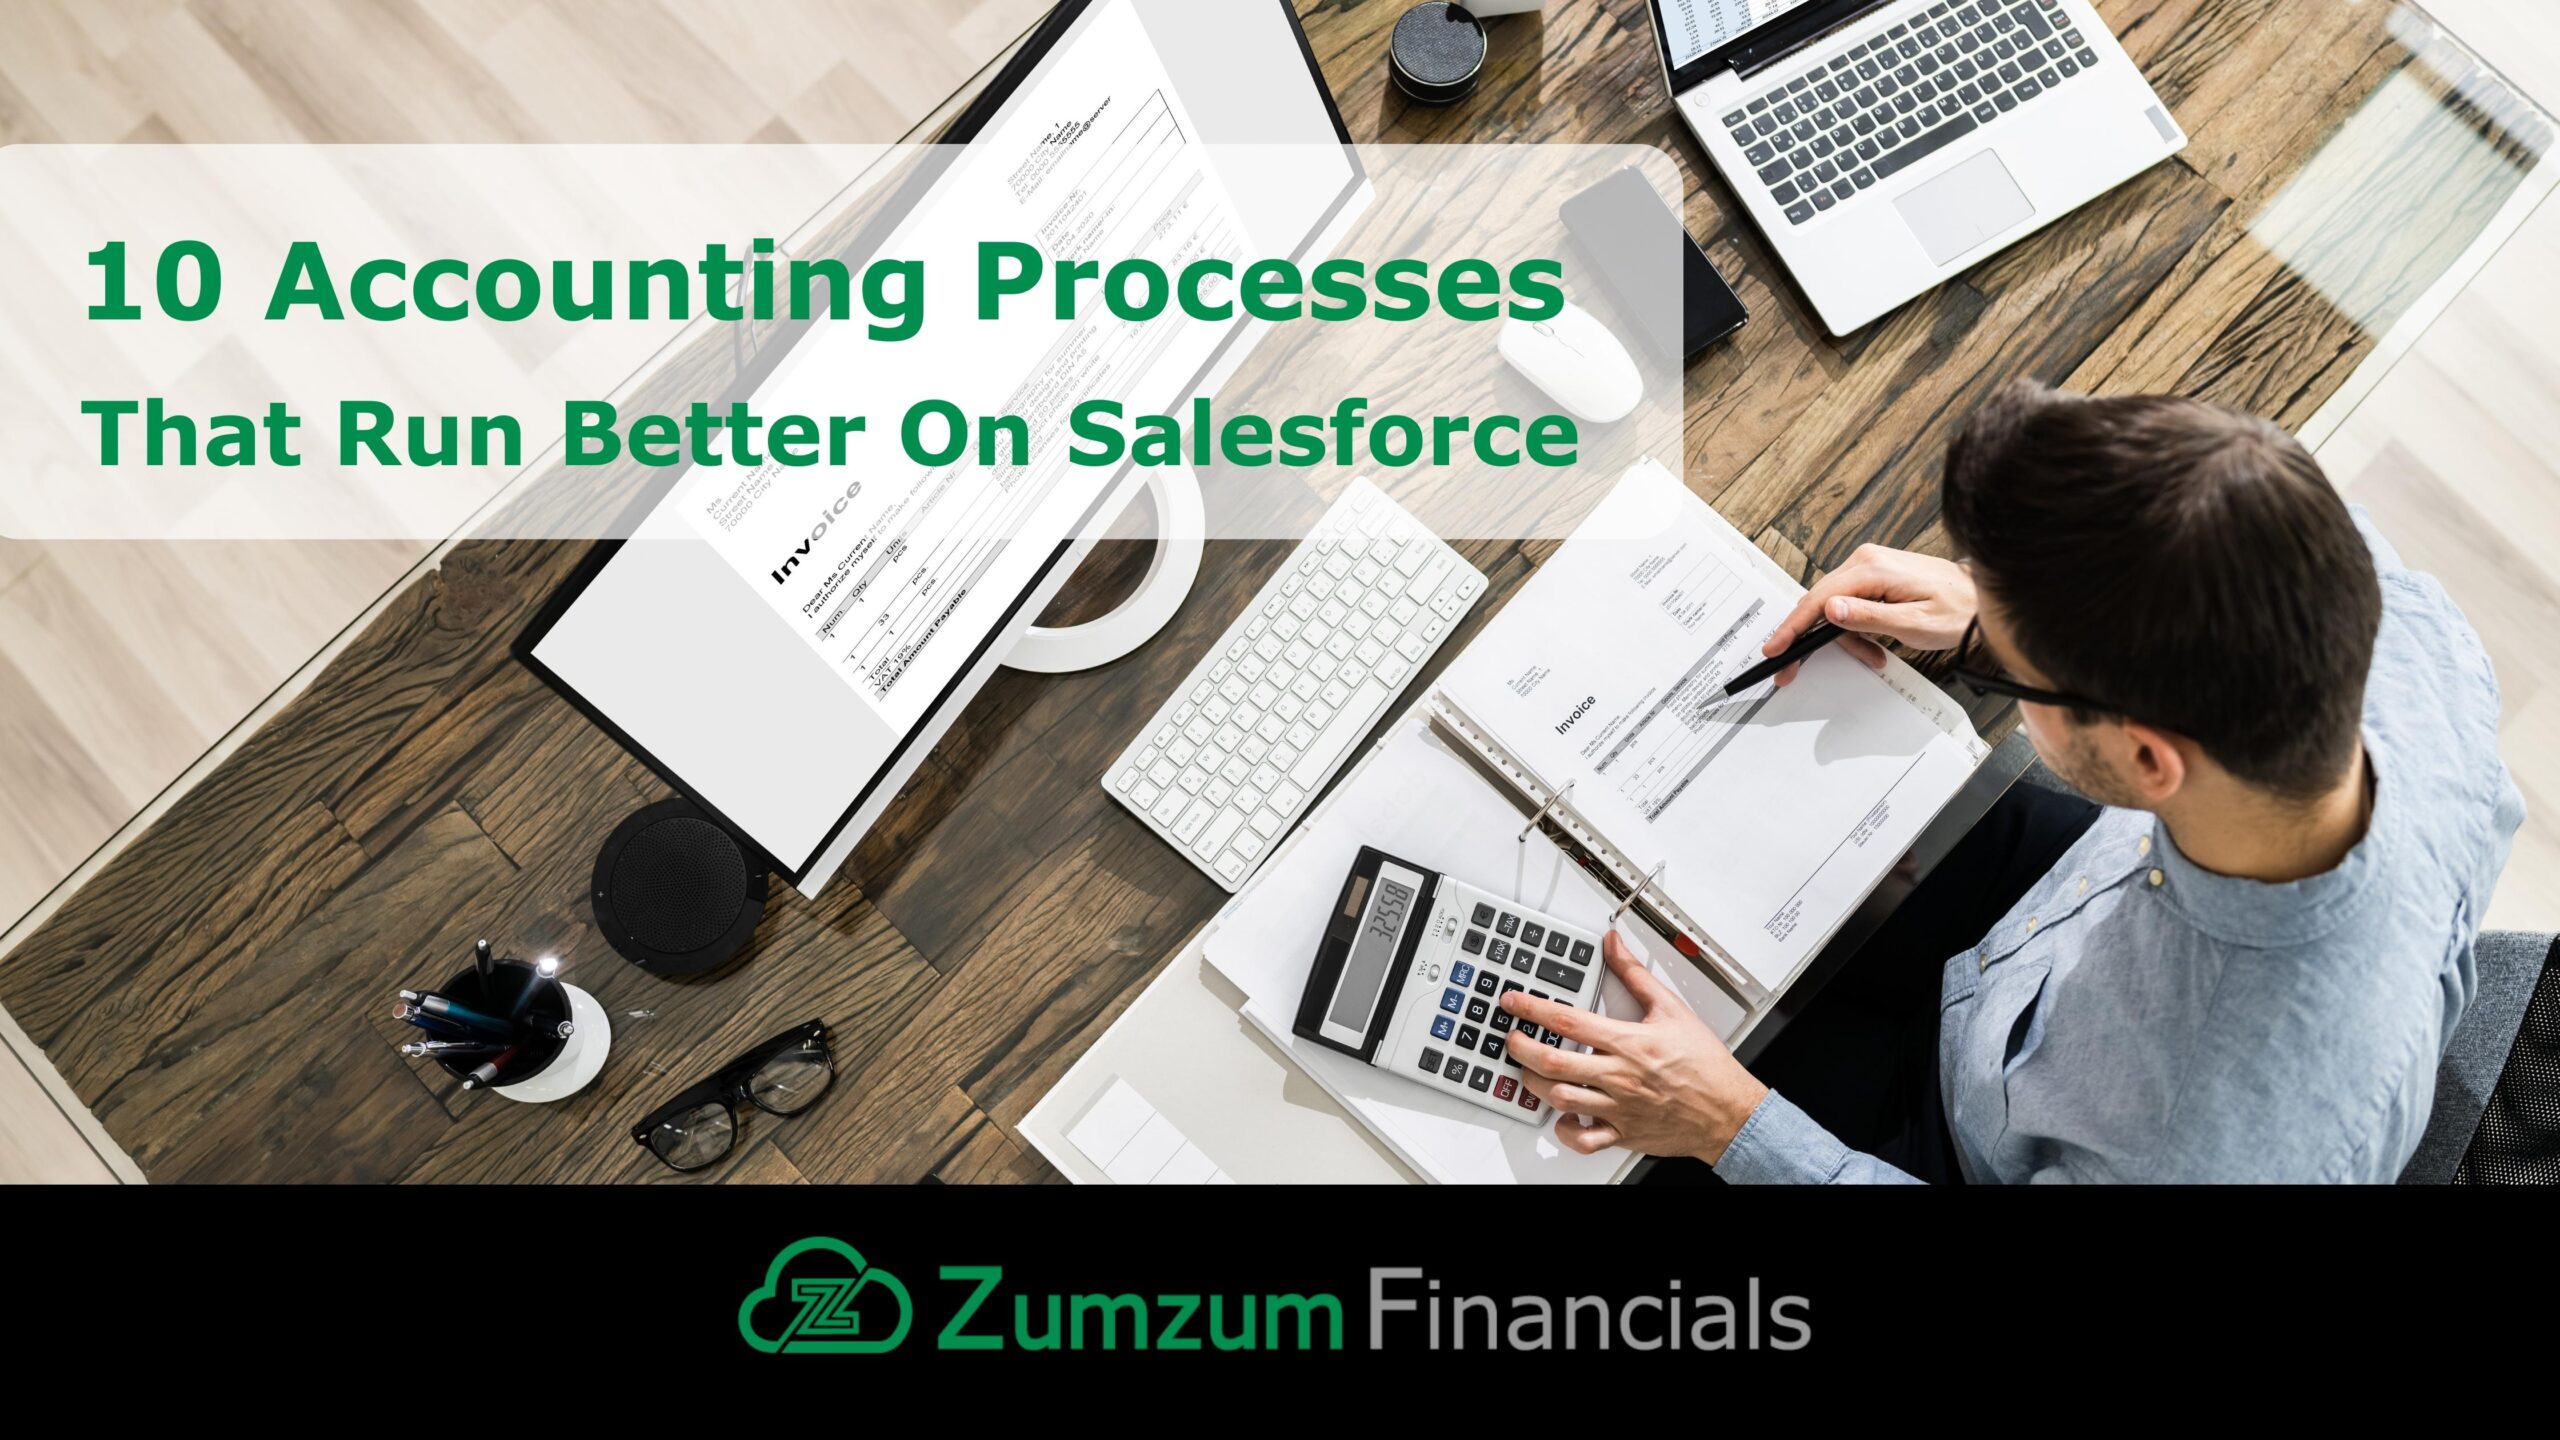 10 Accounting Processes That Run Better On Salesforce